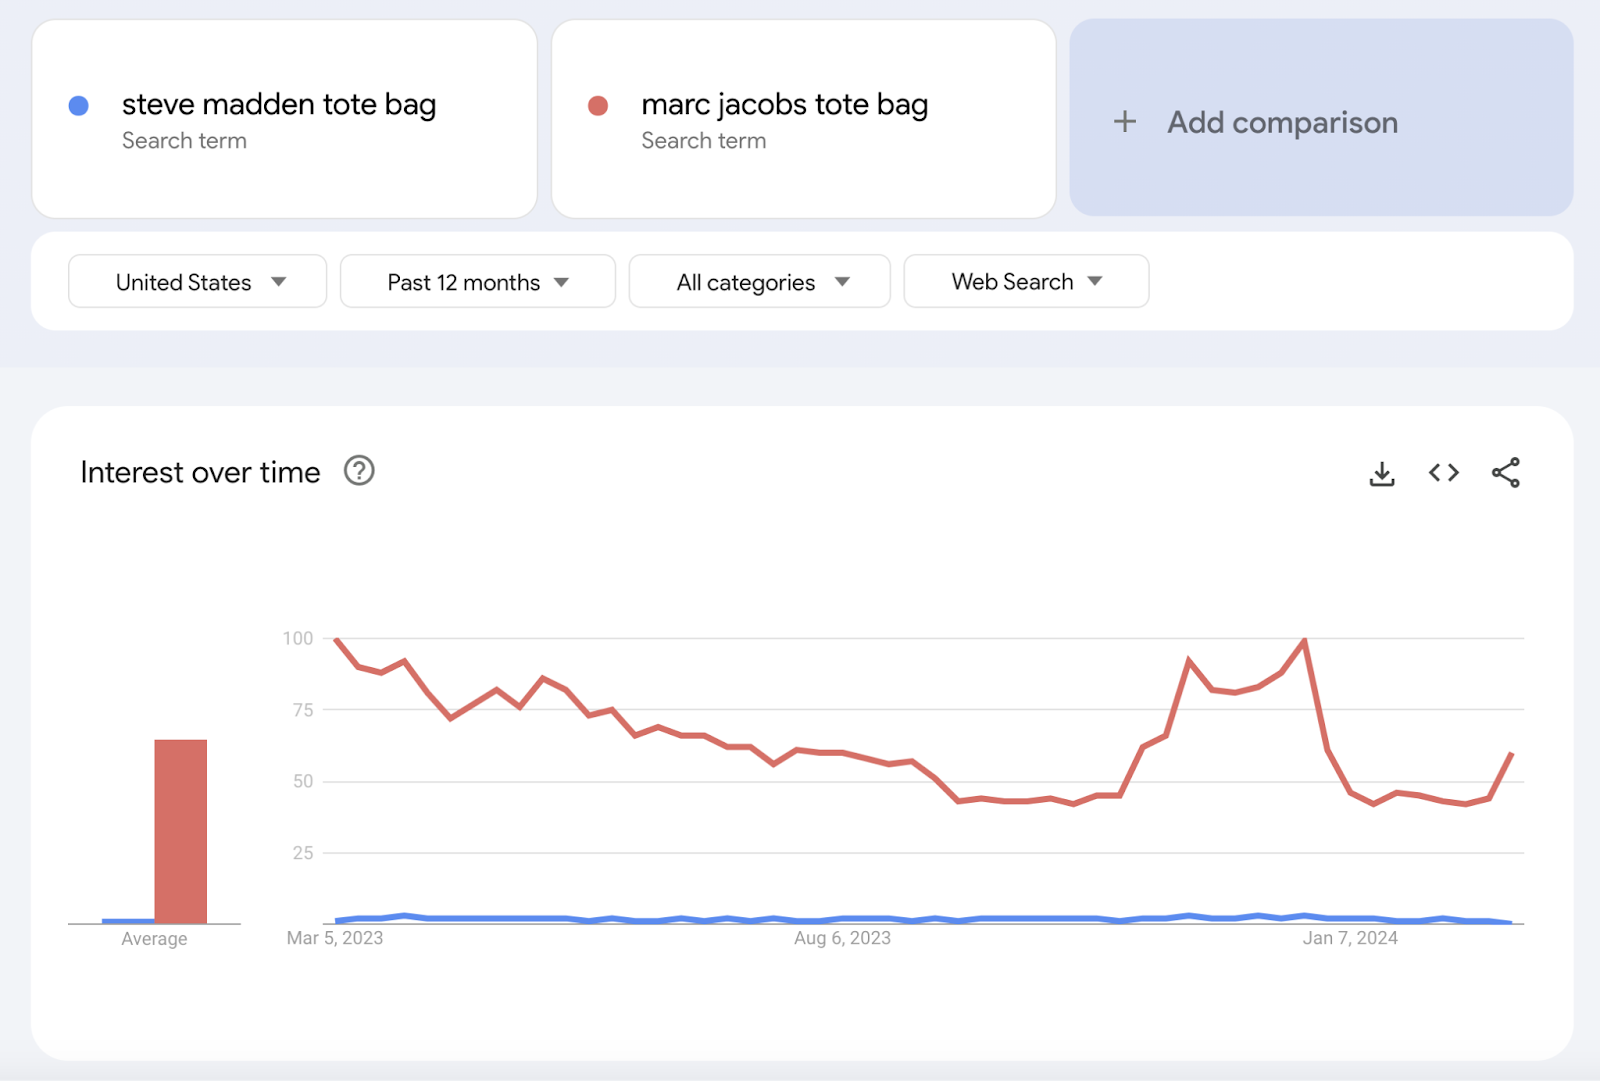 Google Trends "interest implicit    time" graphs comparing "steve madden tote bag," and "marc jacobs tote bag" queries